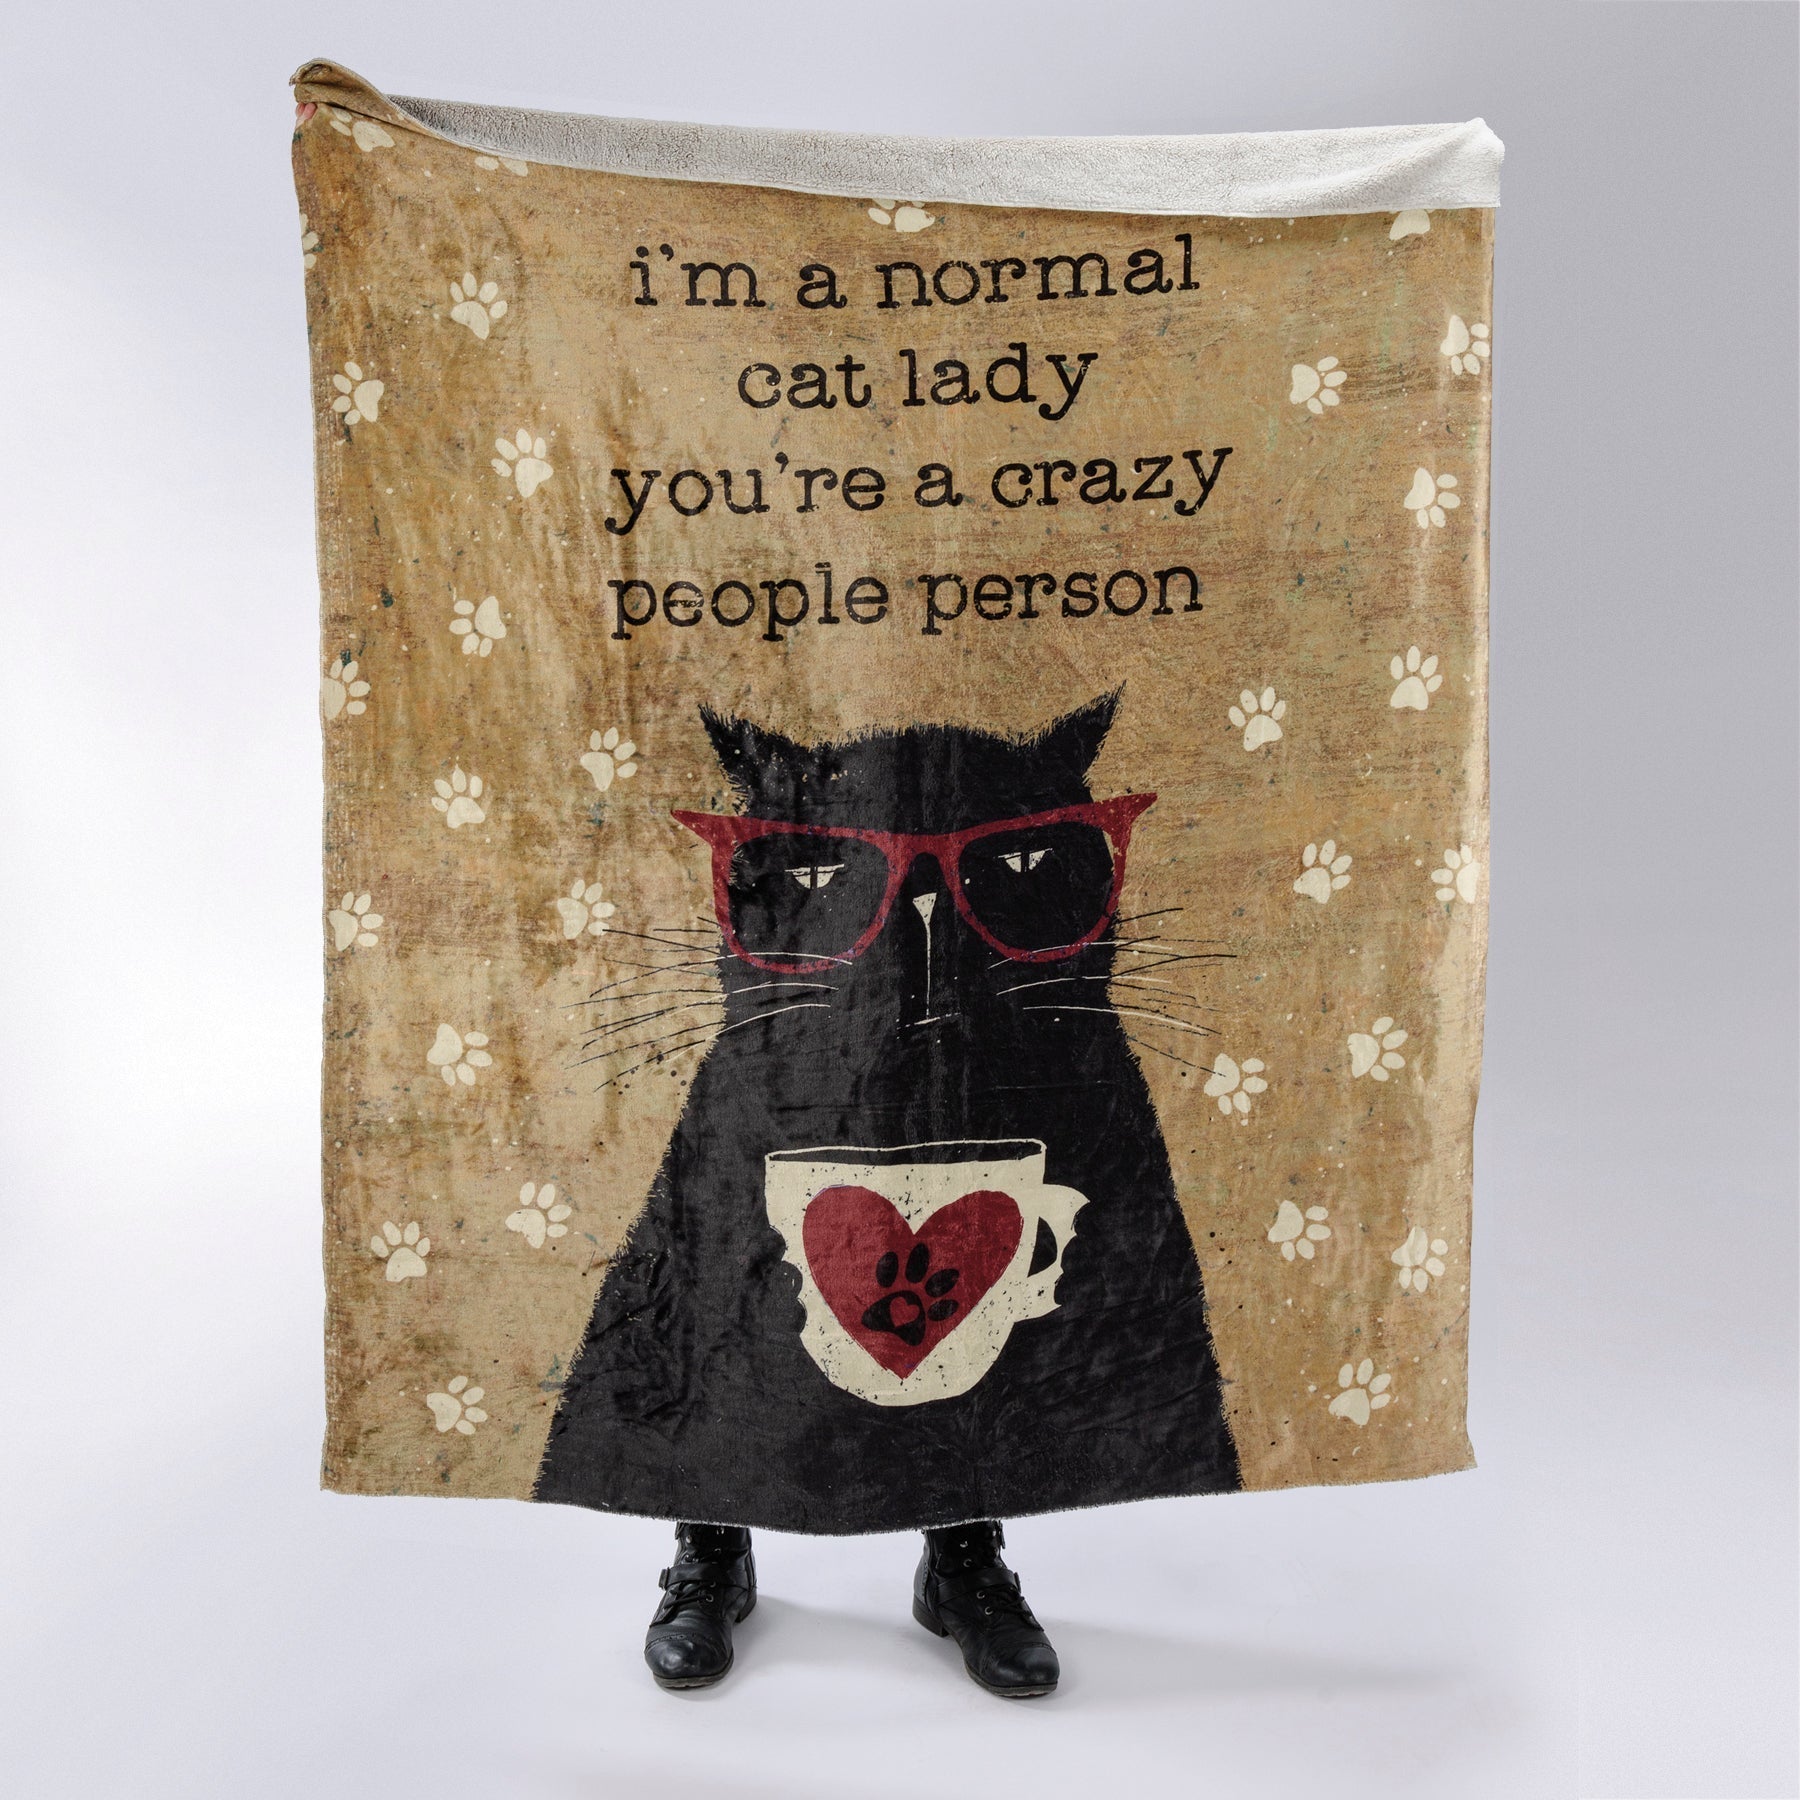 Cat Person Blanket Featuring The Words "I'm A Normal Cat Lady You're A Crazy People Person"